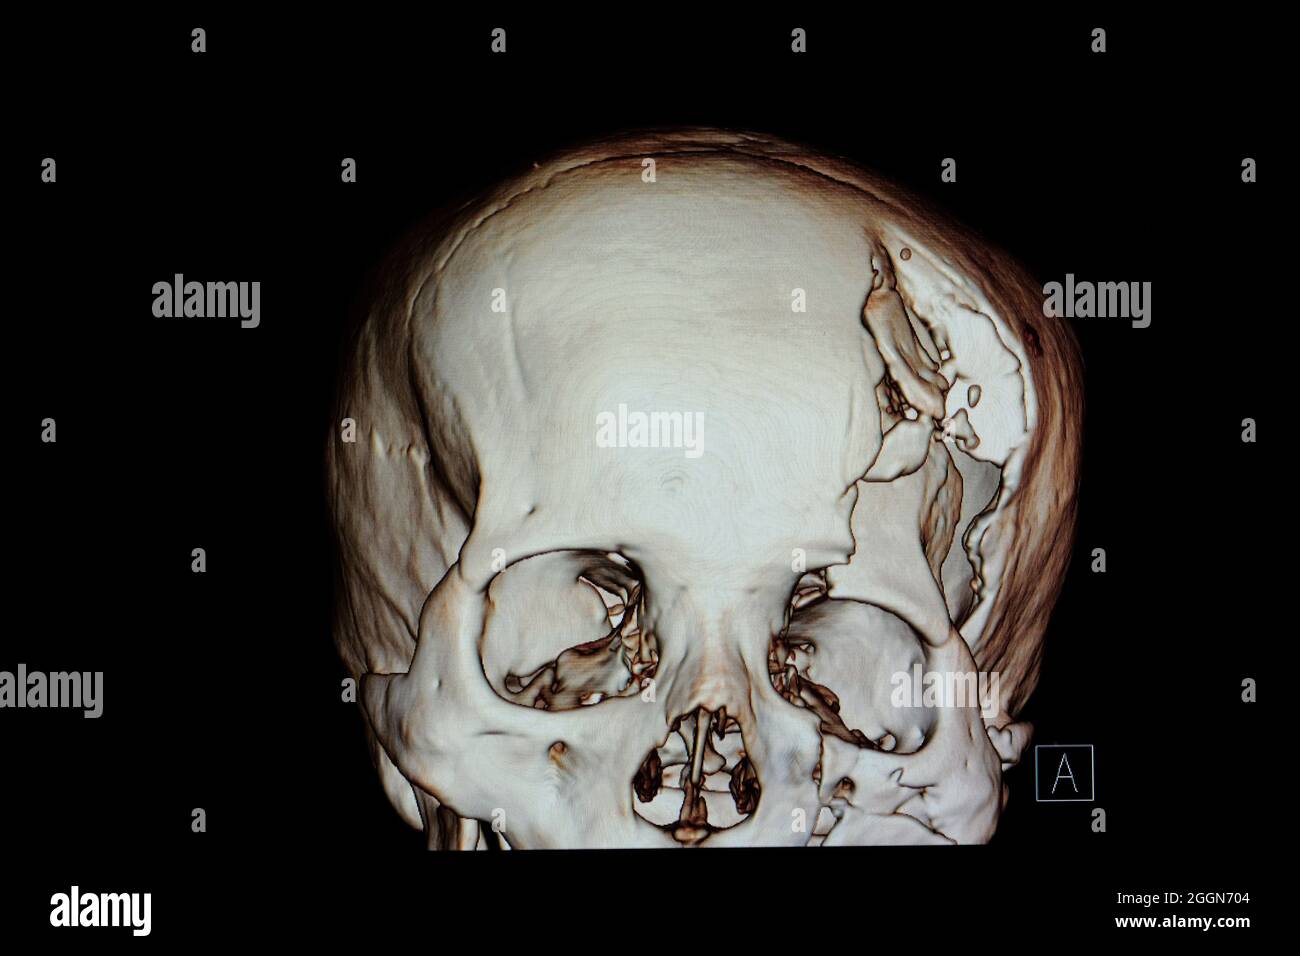 3-D rendering image of a patient skull with traumatic brain injury showing compression fracture of left temperoparietal bone, fracture of left orbital Stock Photo